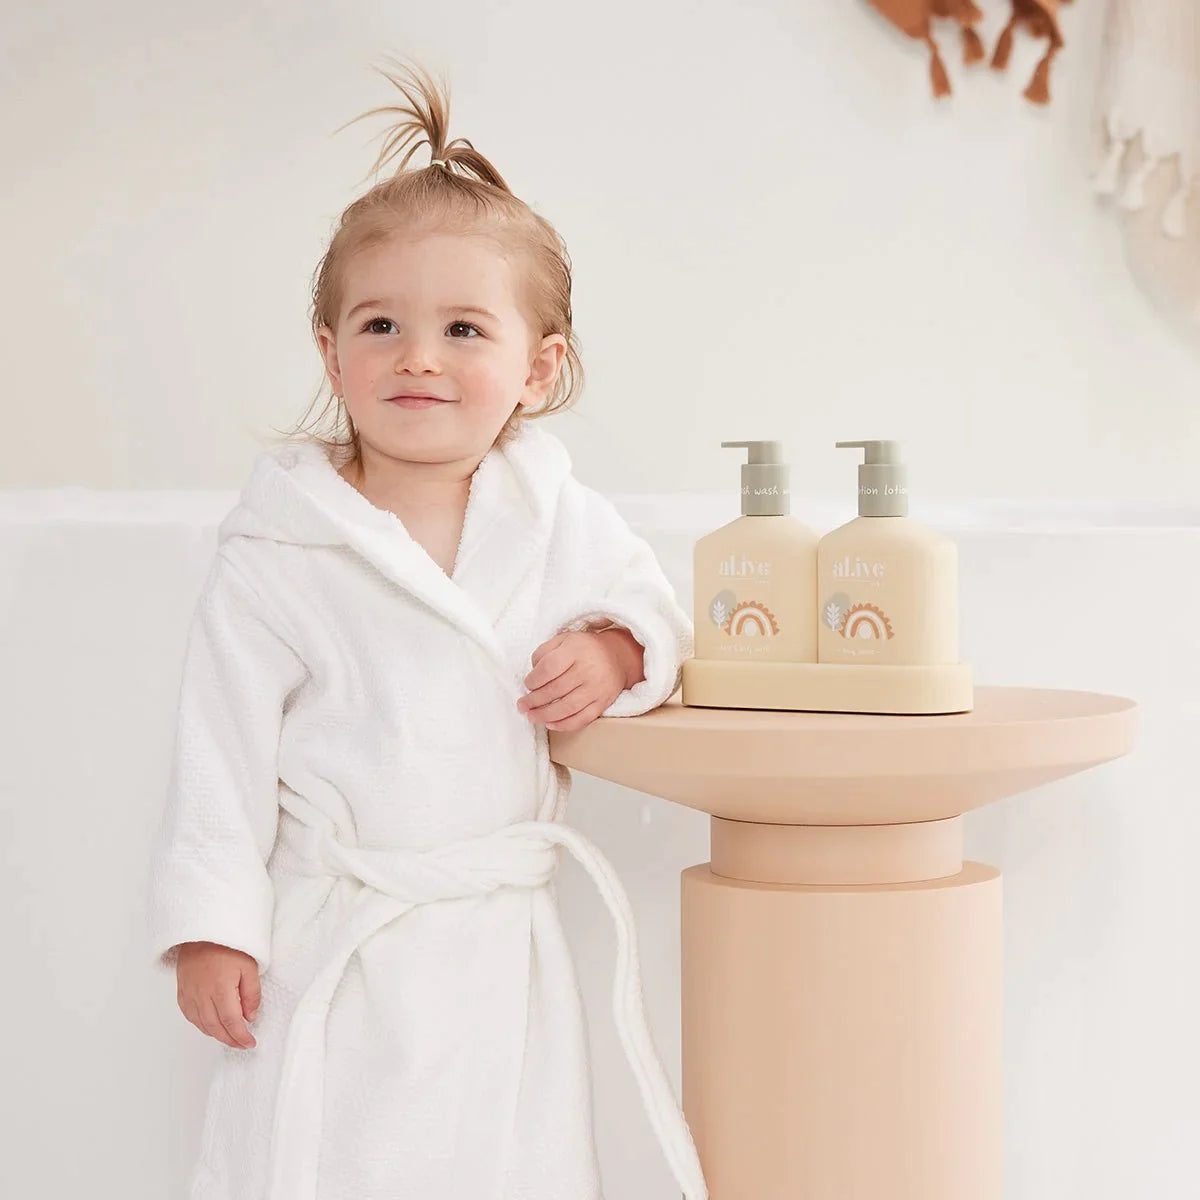 al.ive Baby Duo Hair/Body Wash & Lotion & Tray - Gentle Pear